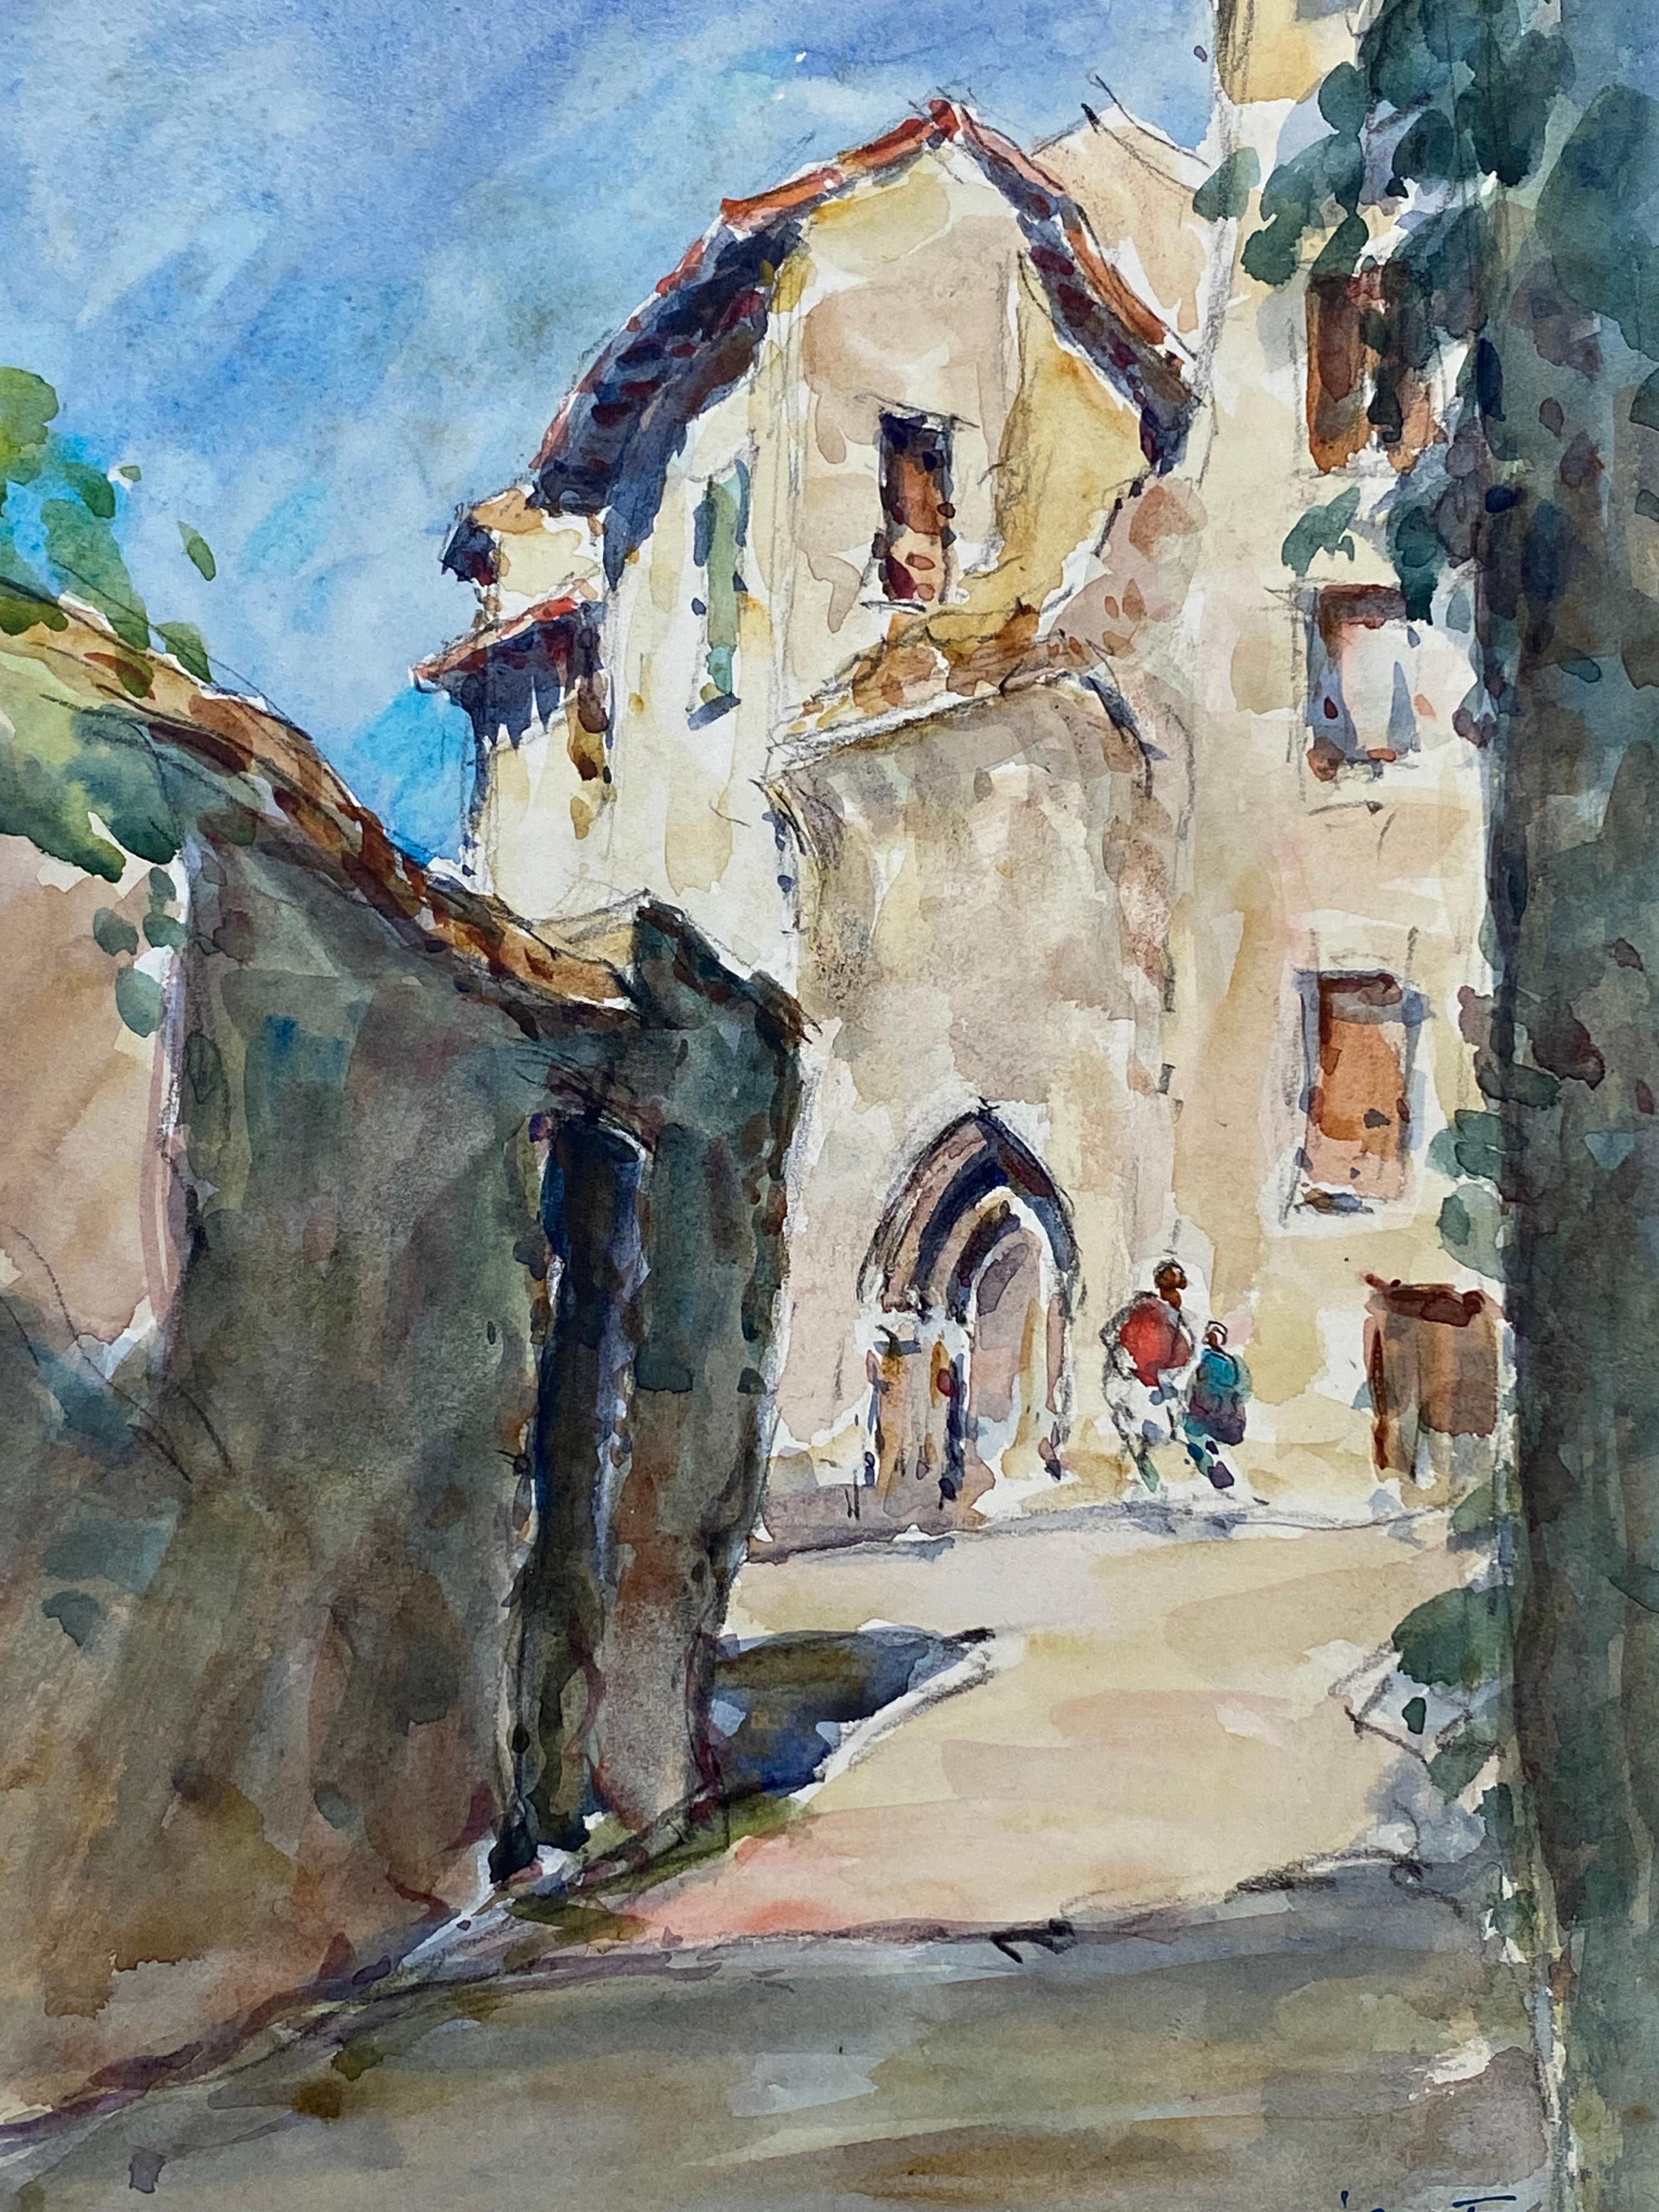 Camille Meriot Landscape Painting - Figures Walking in old Provencal Village, vintage French Impressionist painting